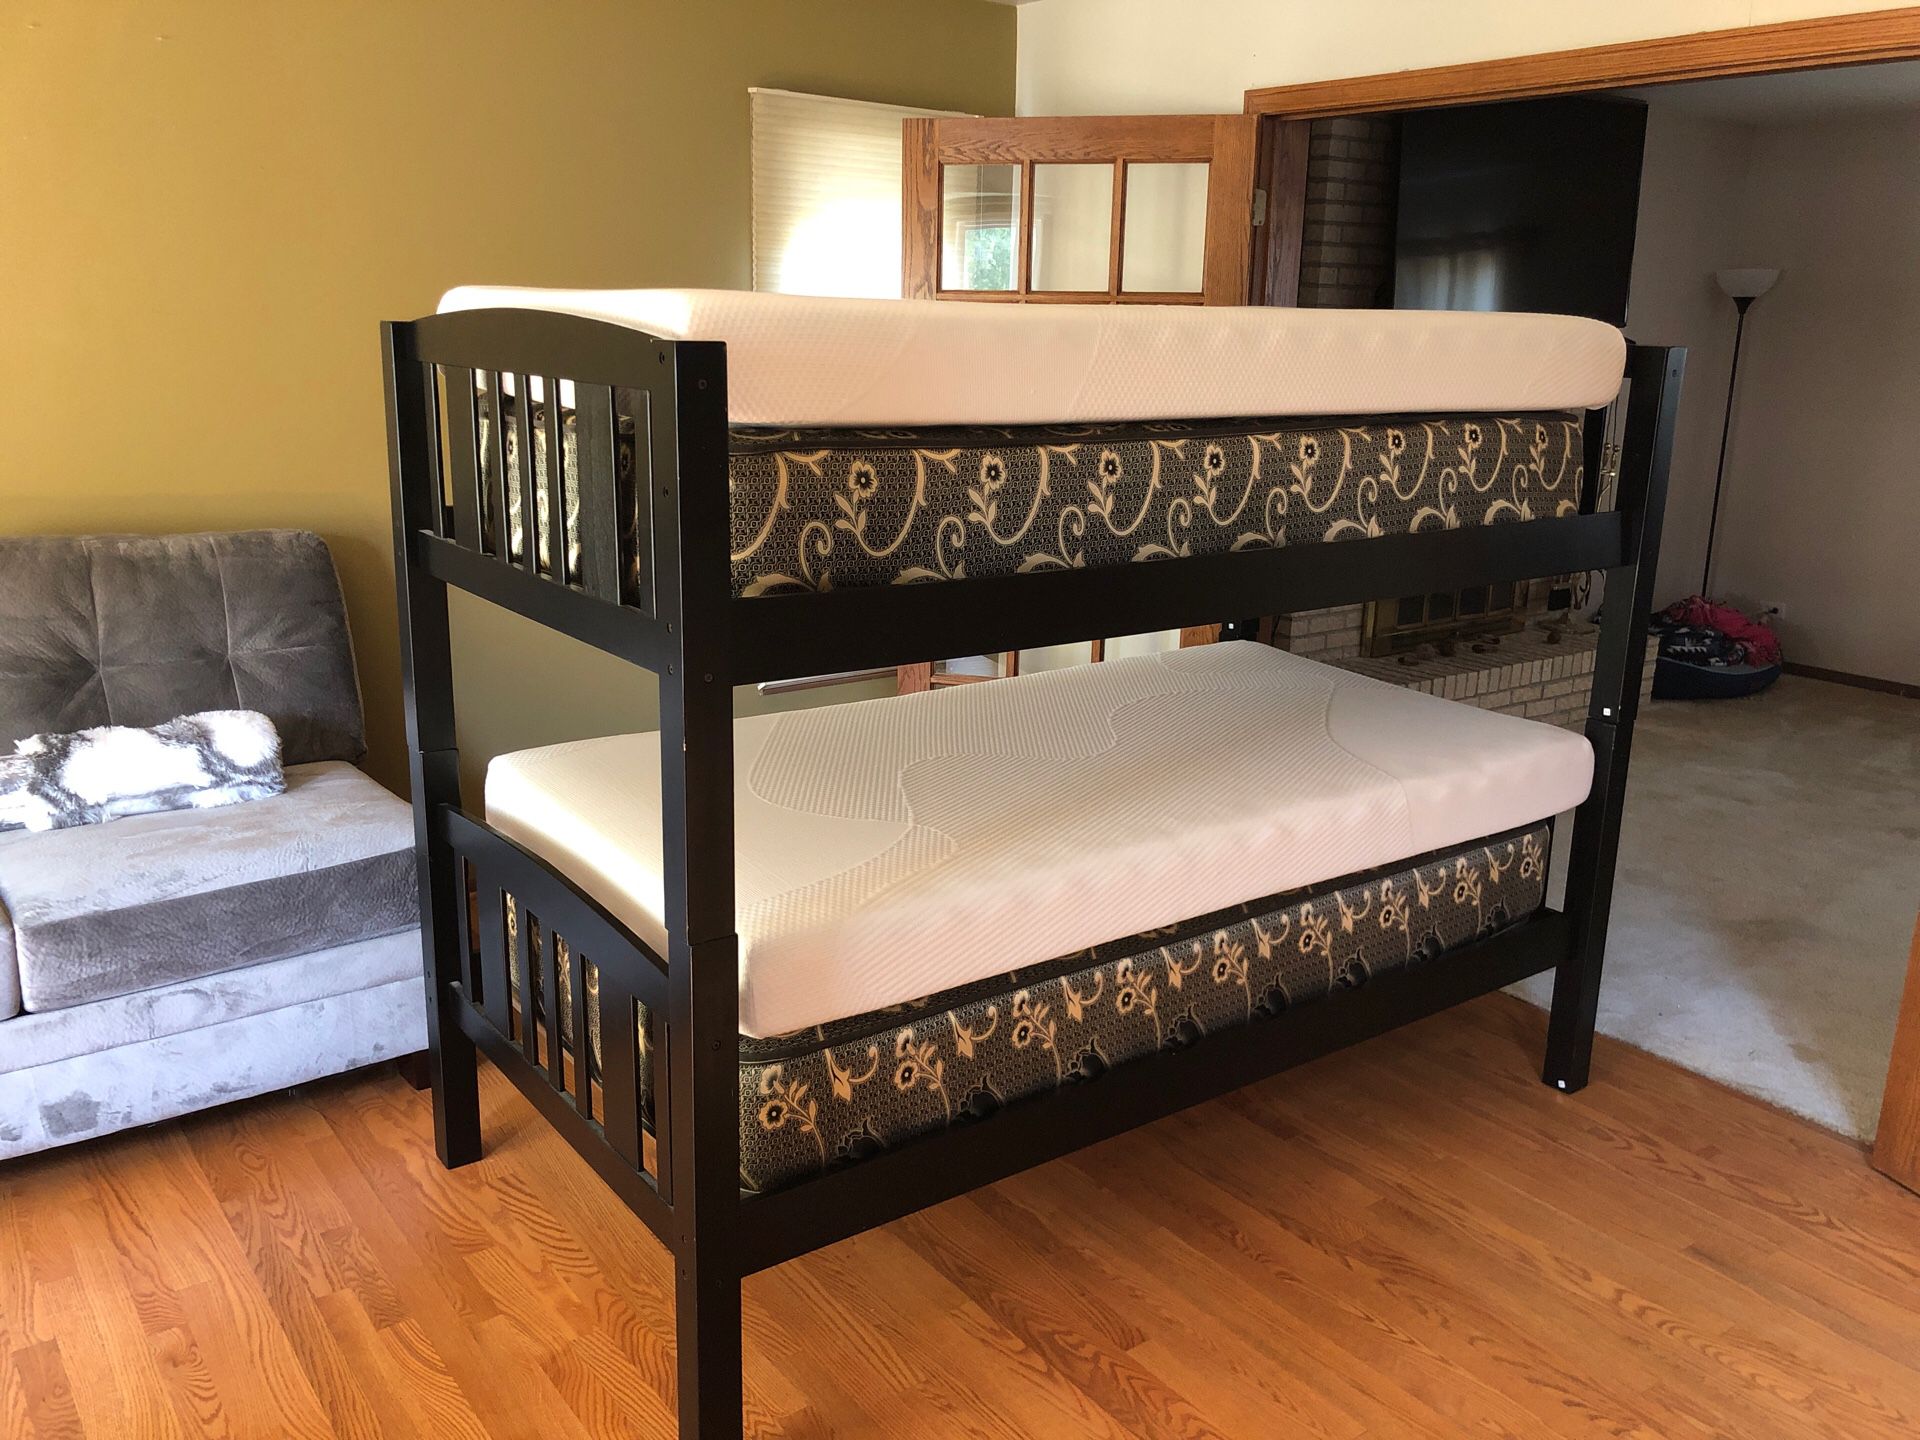 Bunk/twin bed